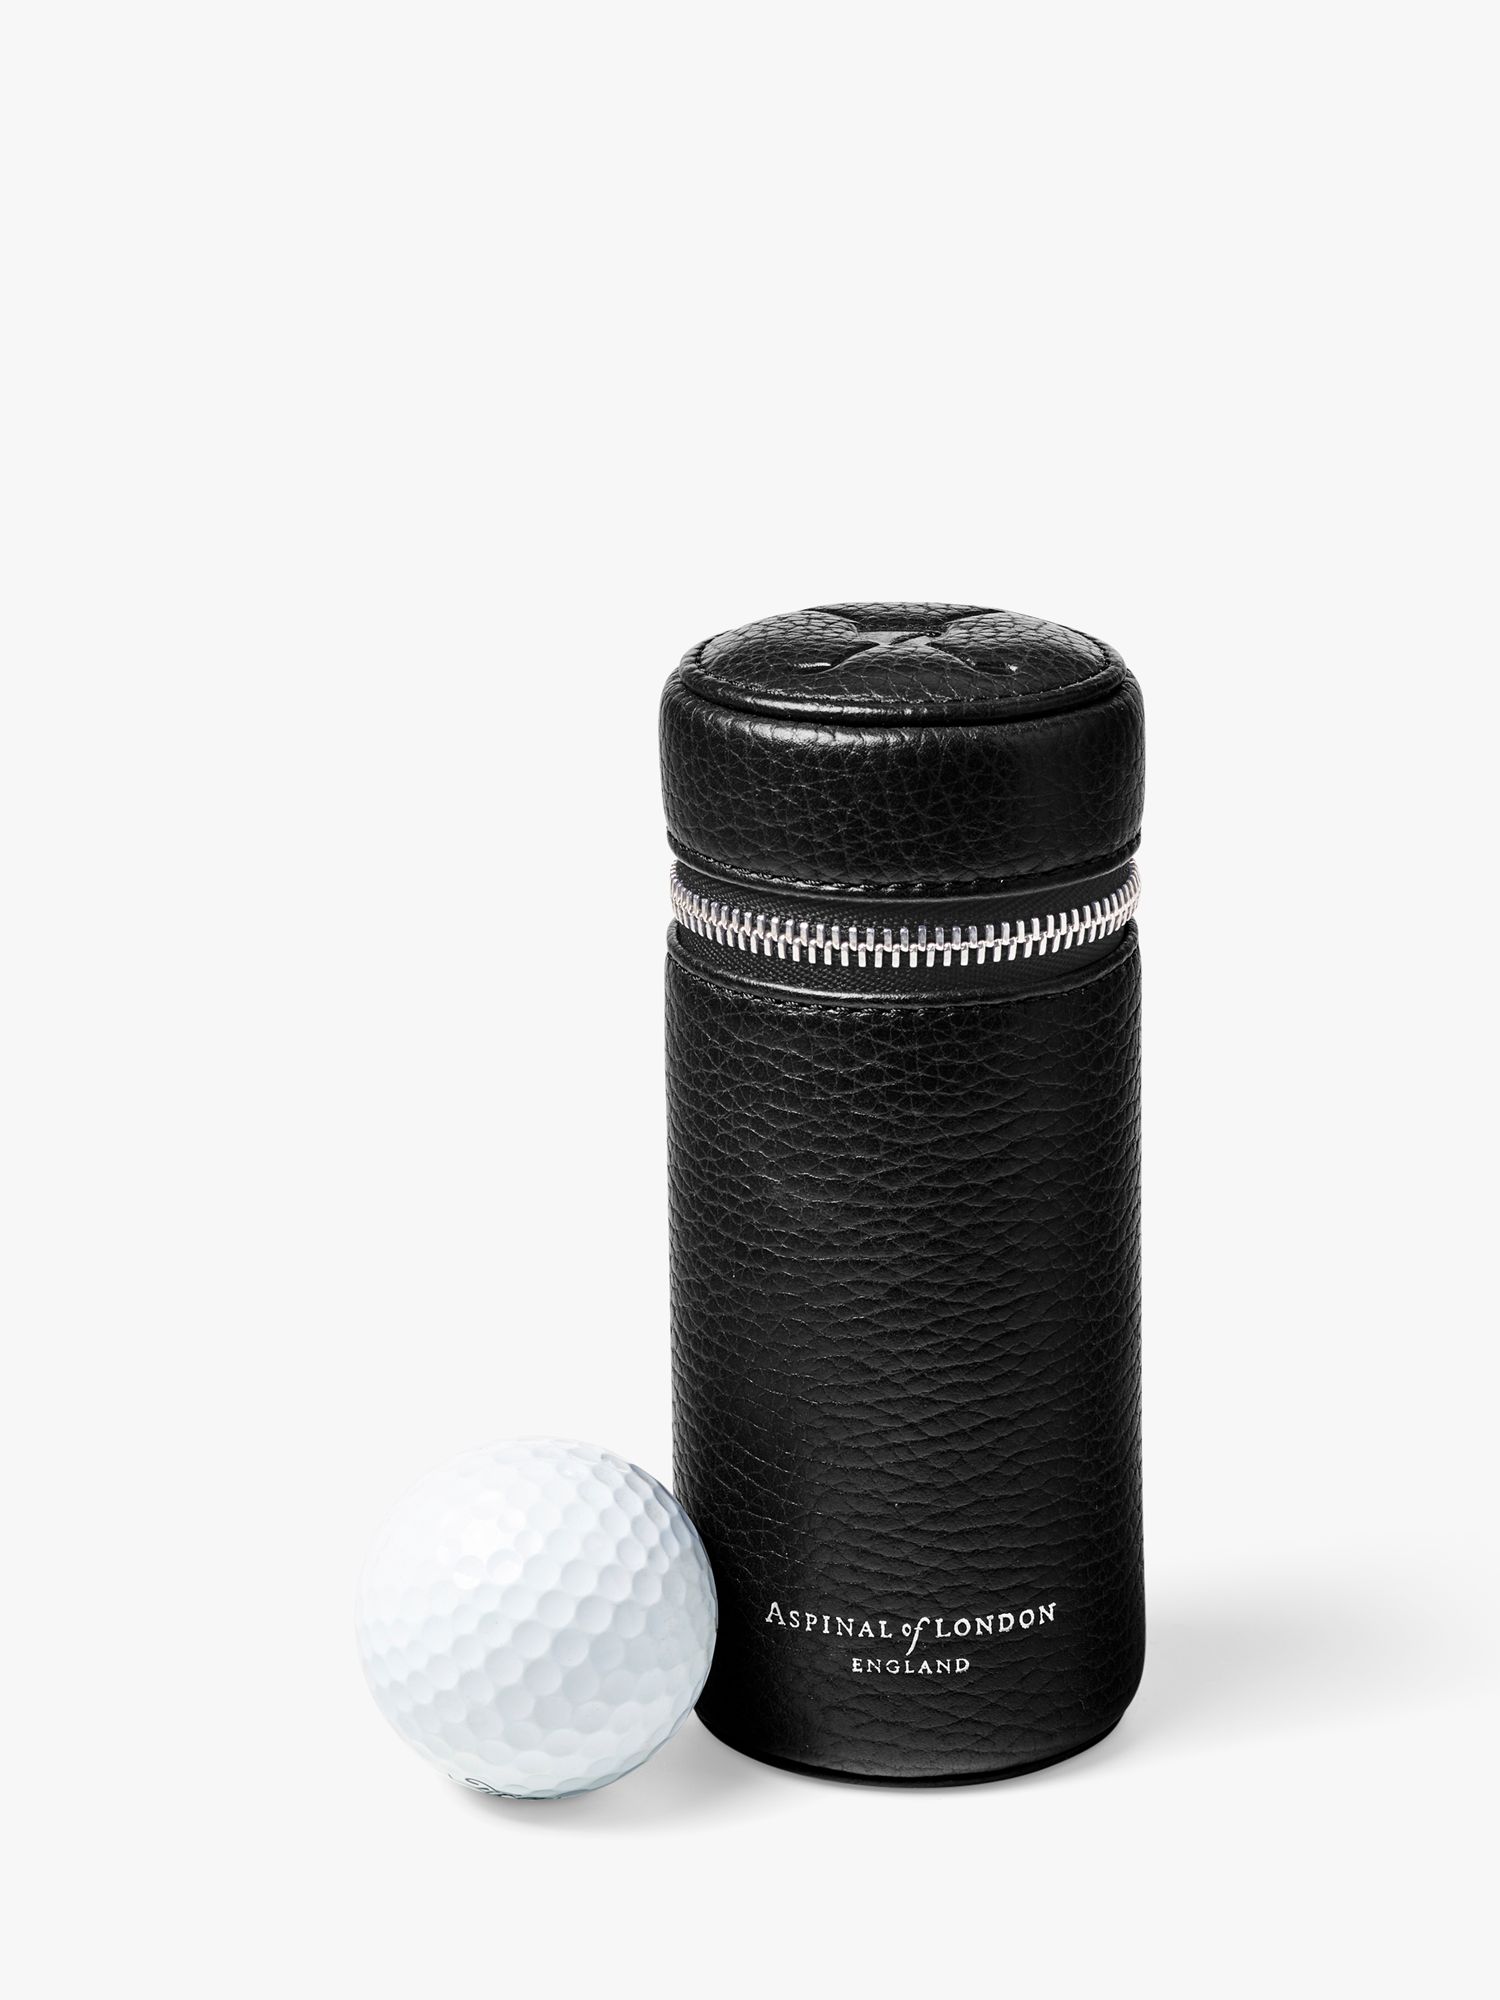 Aspinal of London Leather Golf Ball Holder